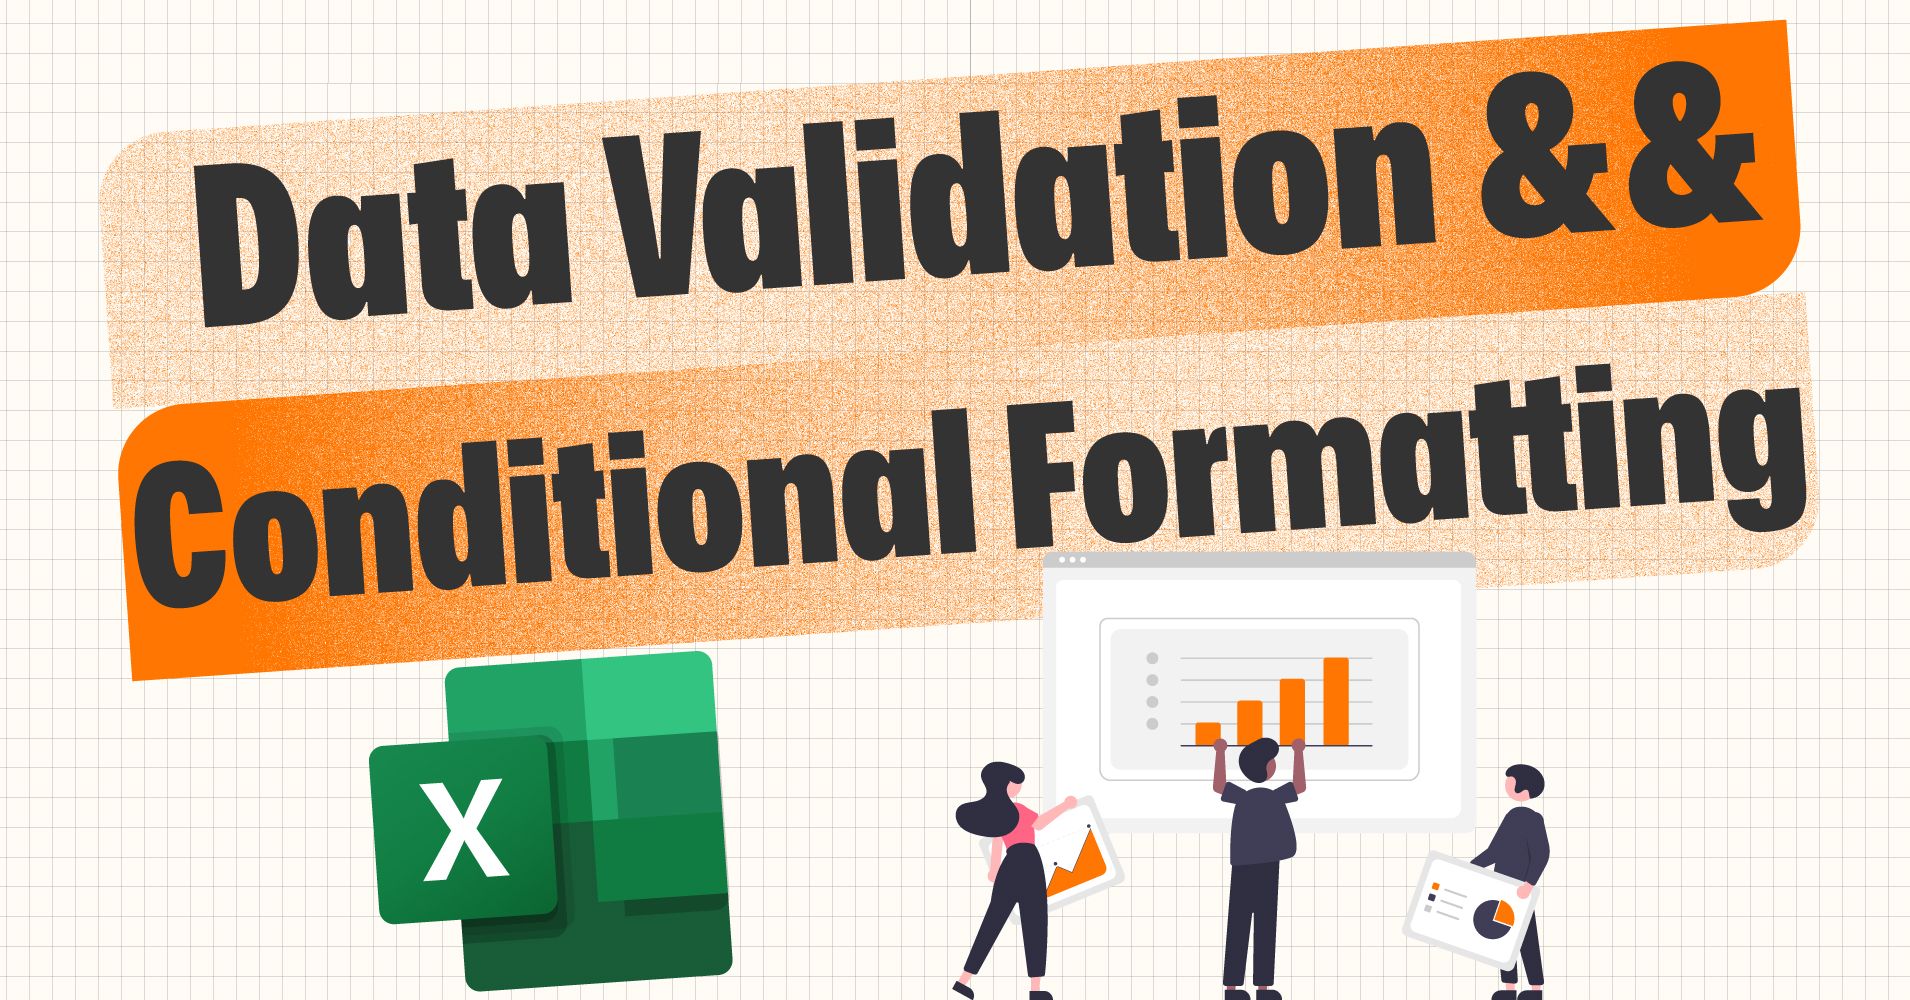 Microsoft Excel – How to Use Data Validation and Conditional Formatting to Prevent Errors